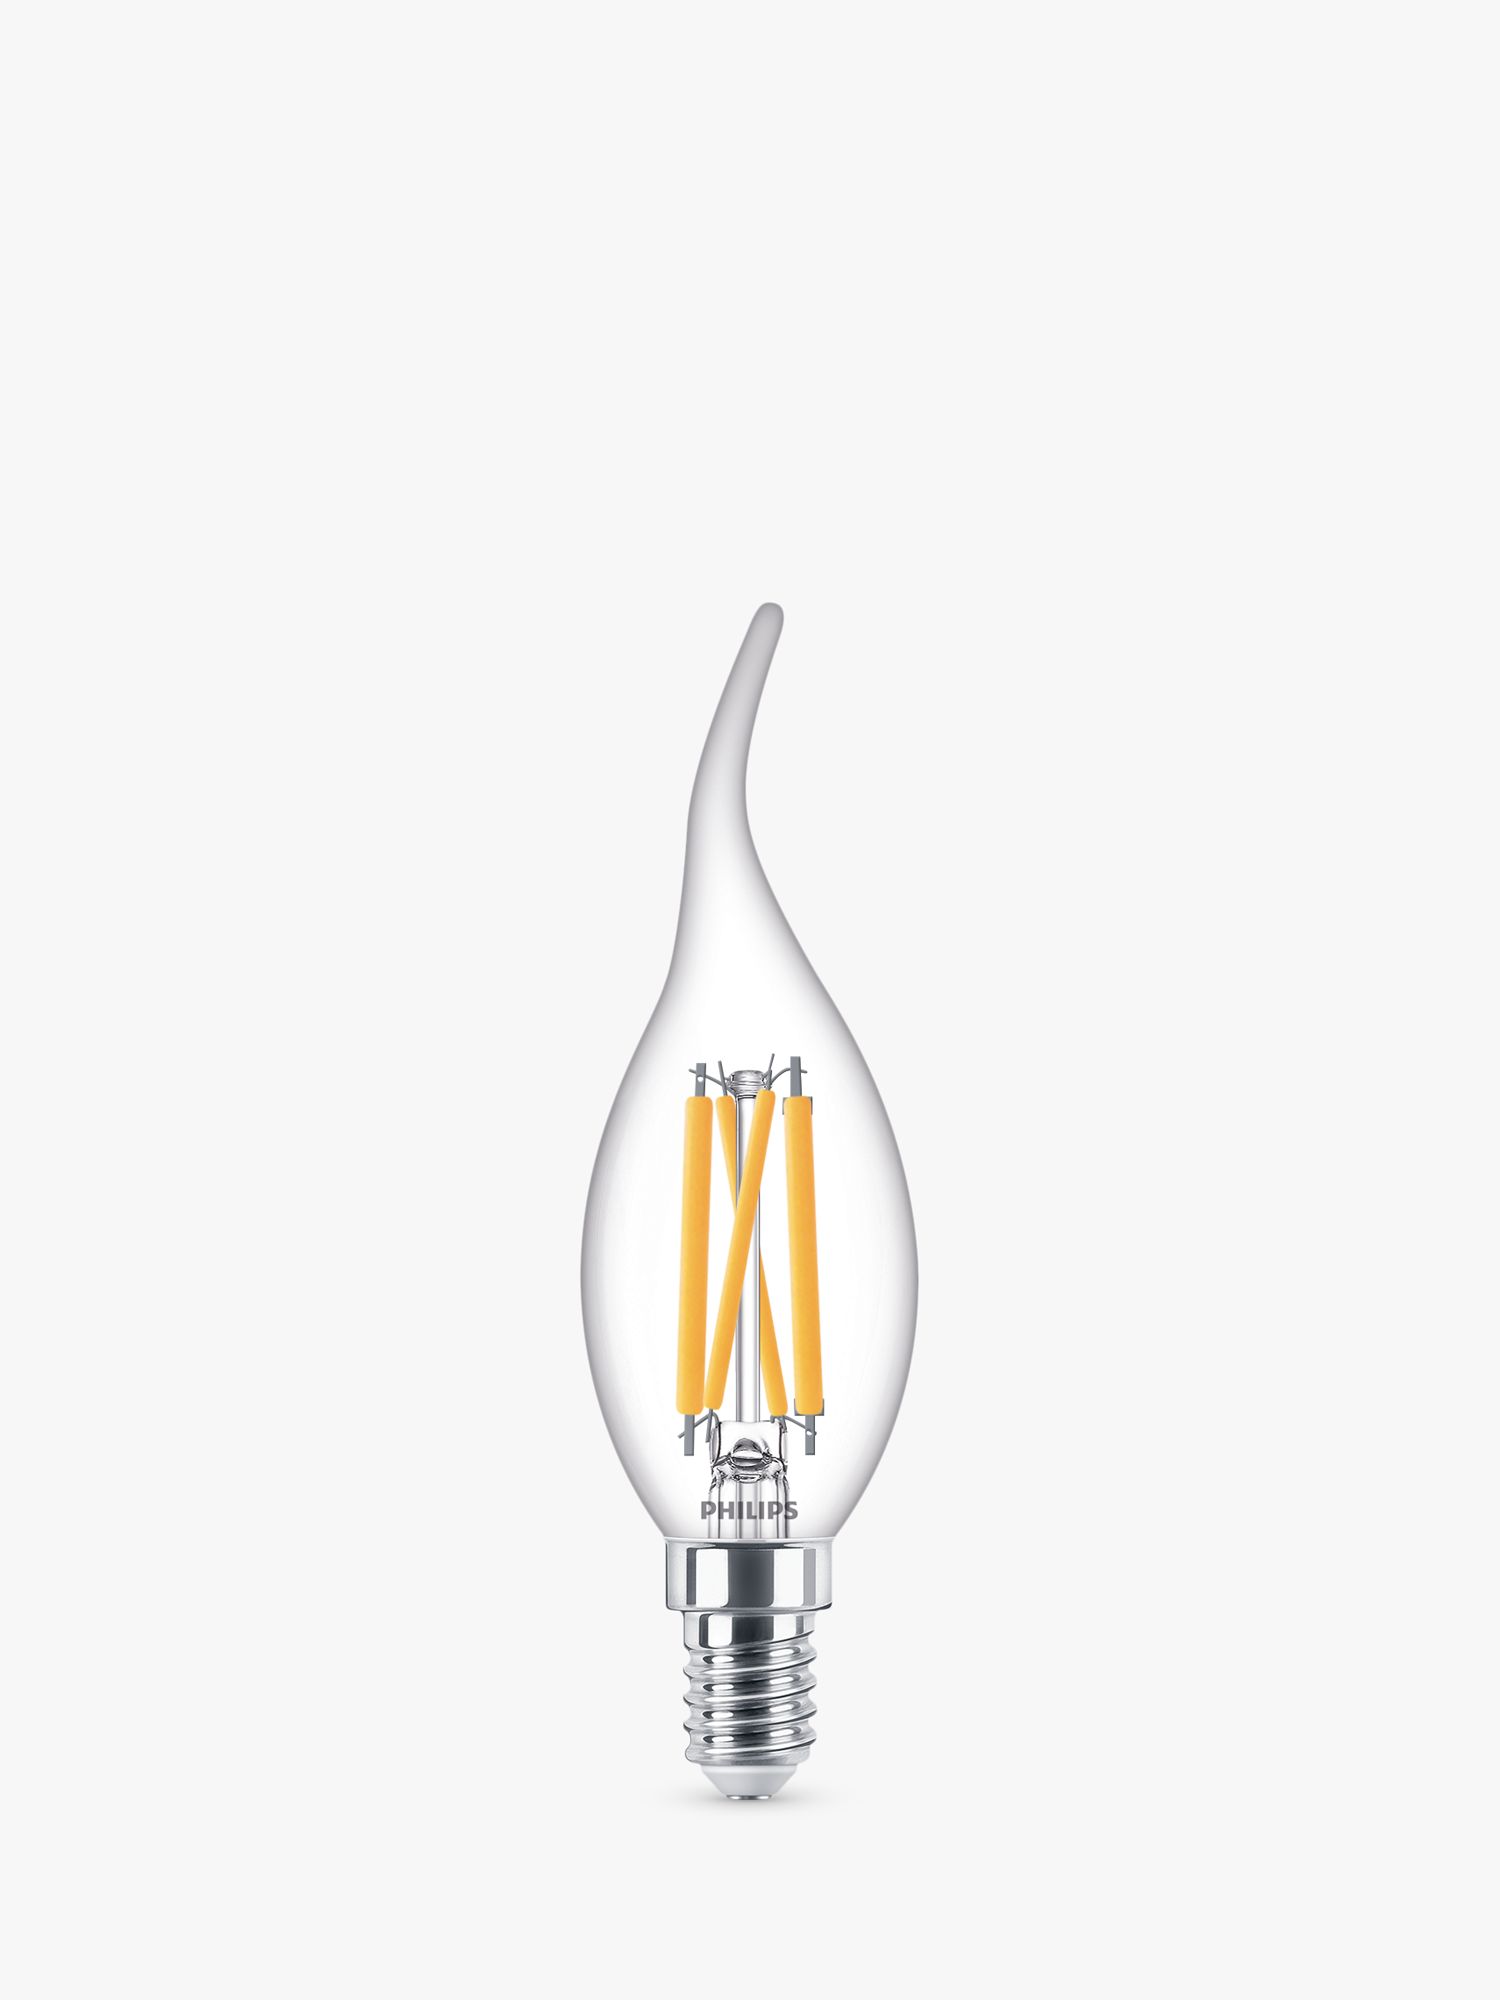 Photo of Philips 25w ba35 ses led dimmable candle bulb clear